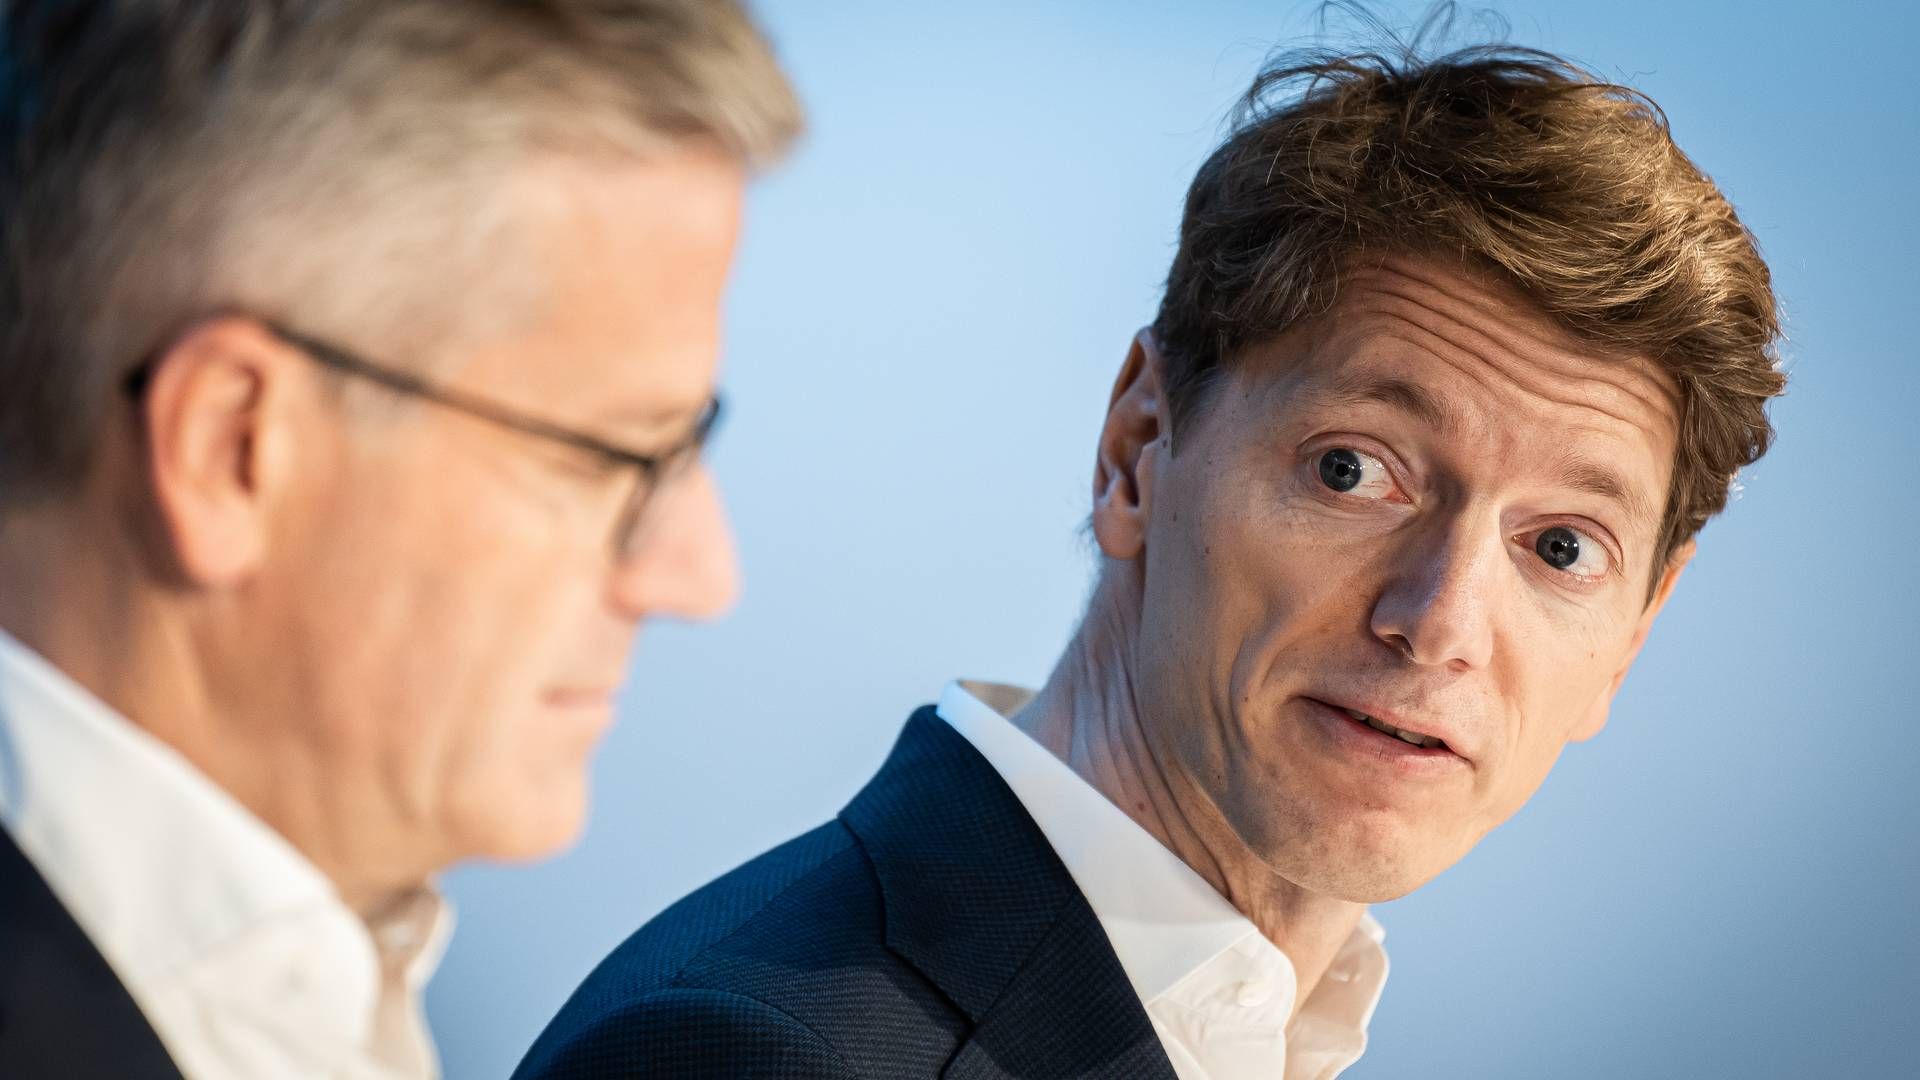 According to analysts, the board, led by Robert Mærsk Uggla (right), has found the obvious candidate in Vincent Clerc (left) to succeed Søren Skou as chief executive of Maersk at the turn of the year | Photo: Emil Helms/Ritzau Scanpix